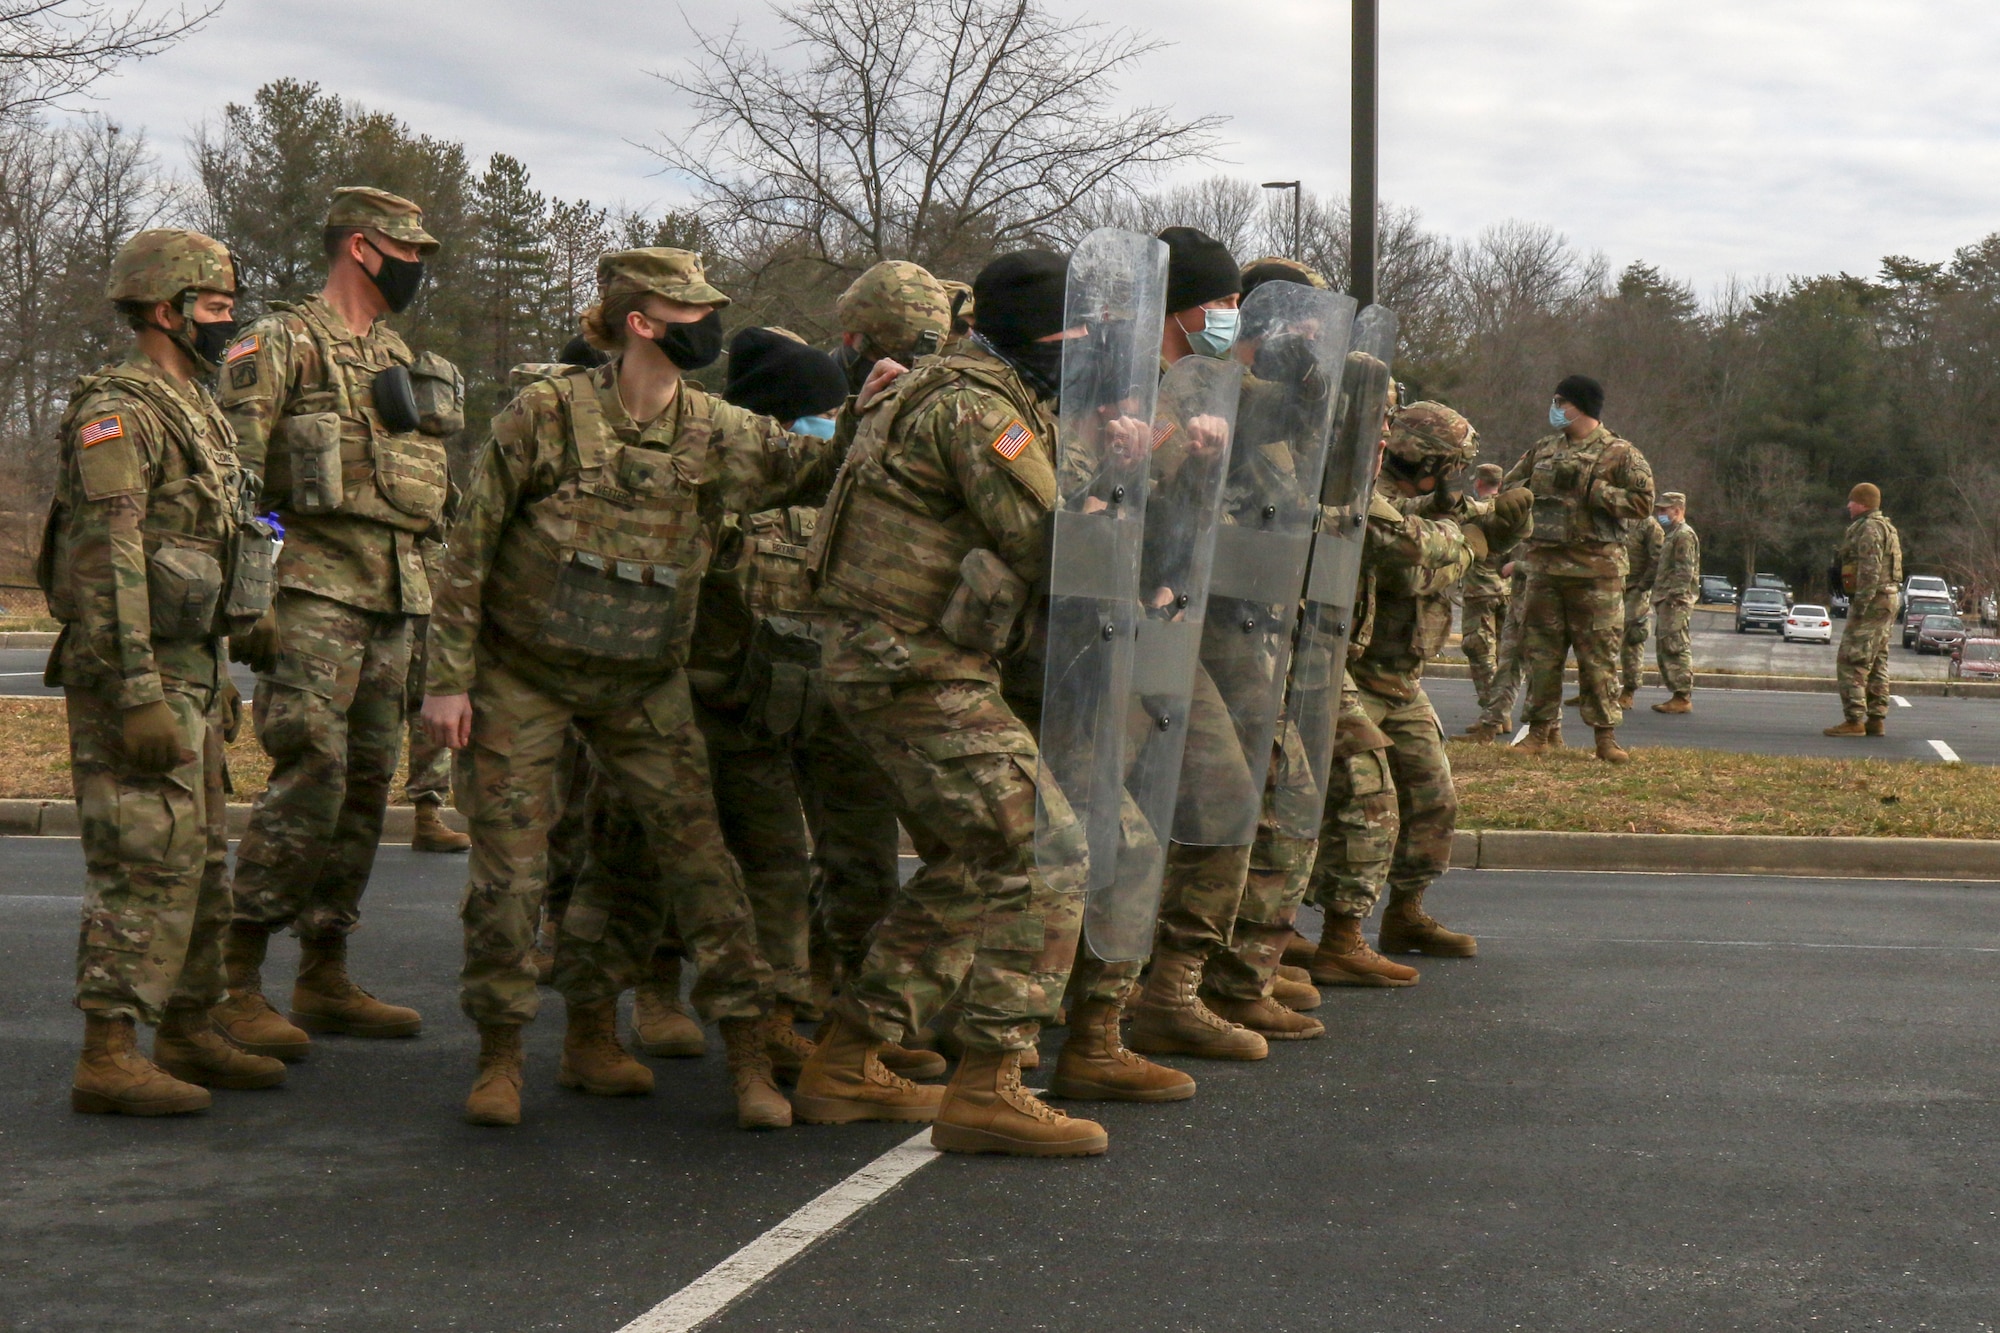 U.S. Soldiers with the 172nd Cavalry Regiment, 86th Infantry Brigade Combat Team (Mountain), Vermont National Guard, train replaceent Soldiers from the 186th BSB 86th Infantry Brigade Combat Team (Mountain) in crowd control in the parking lot of their hotel in Laurel, Maryland